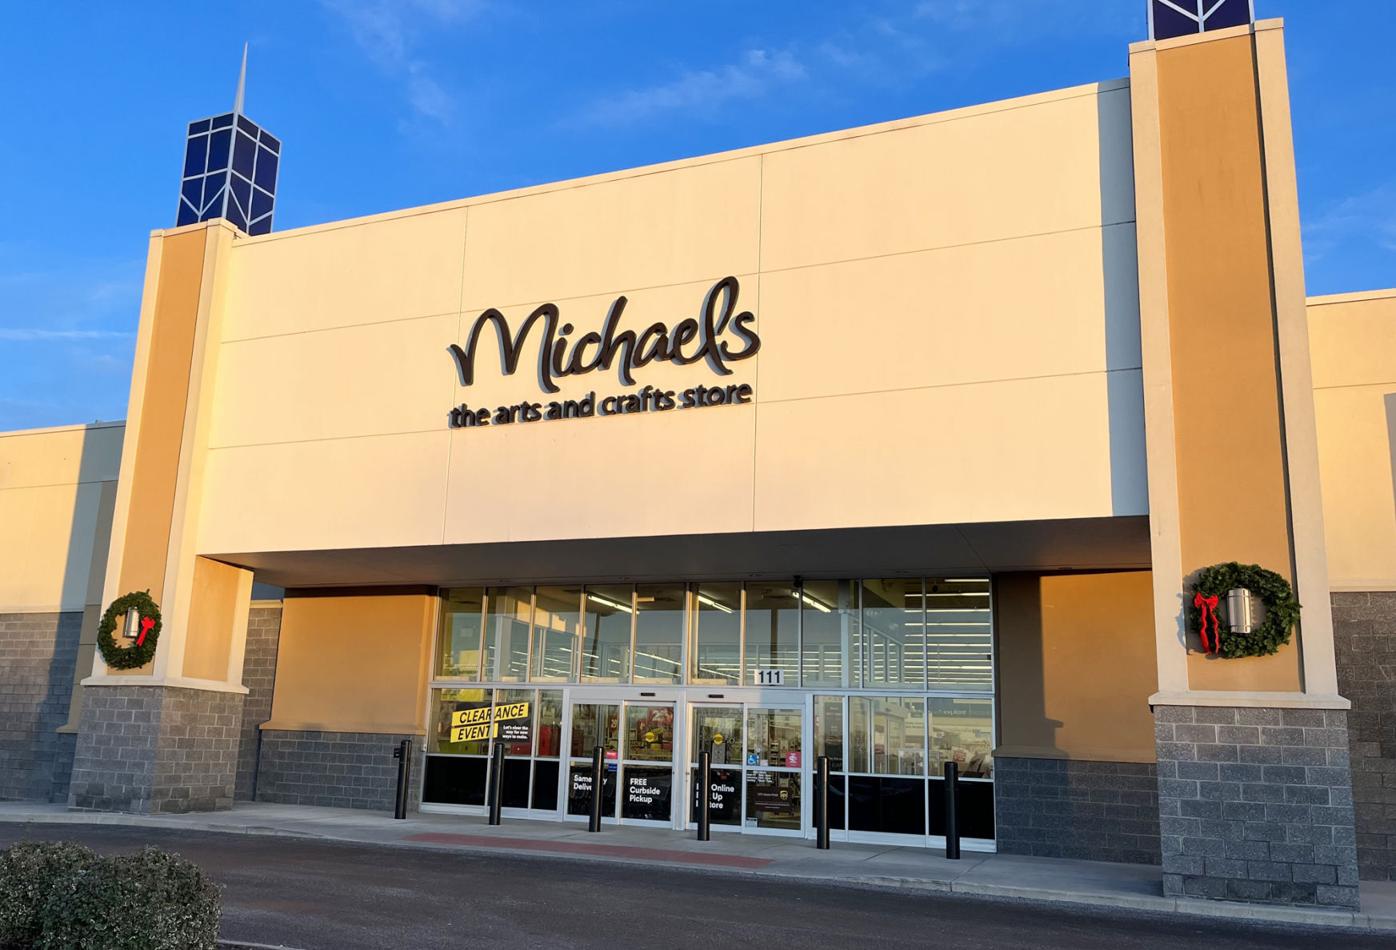 Michaels to Be Acquired by Private Equity Firm - The New York Times